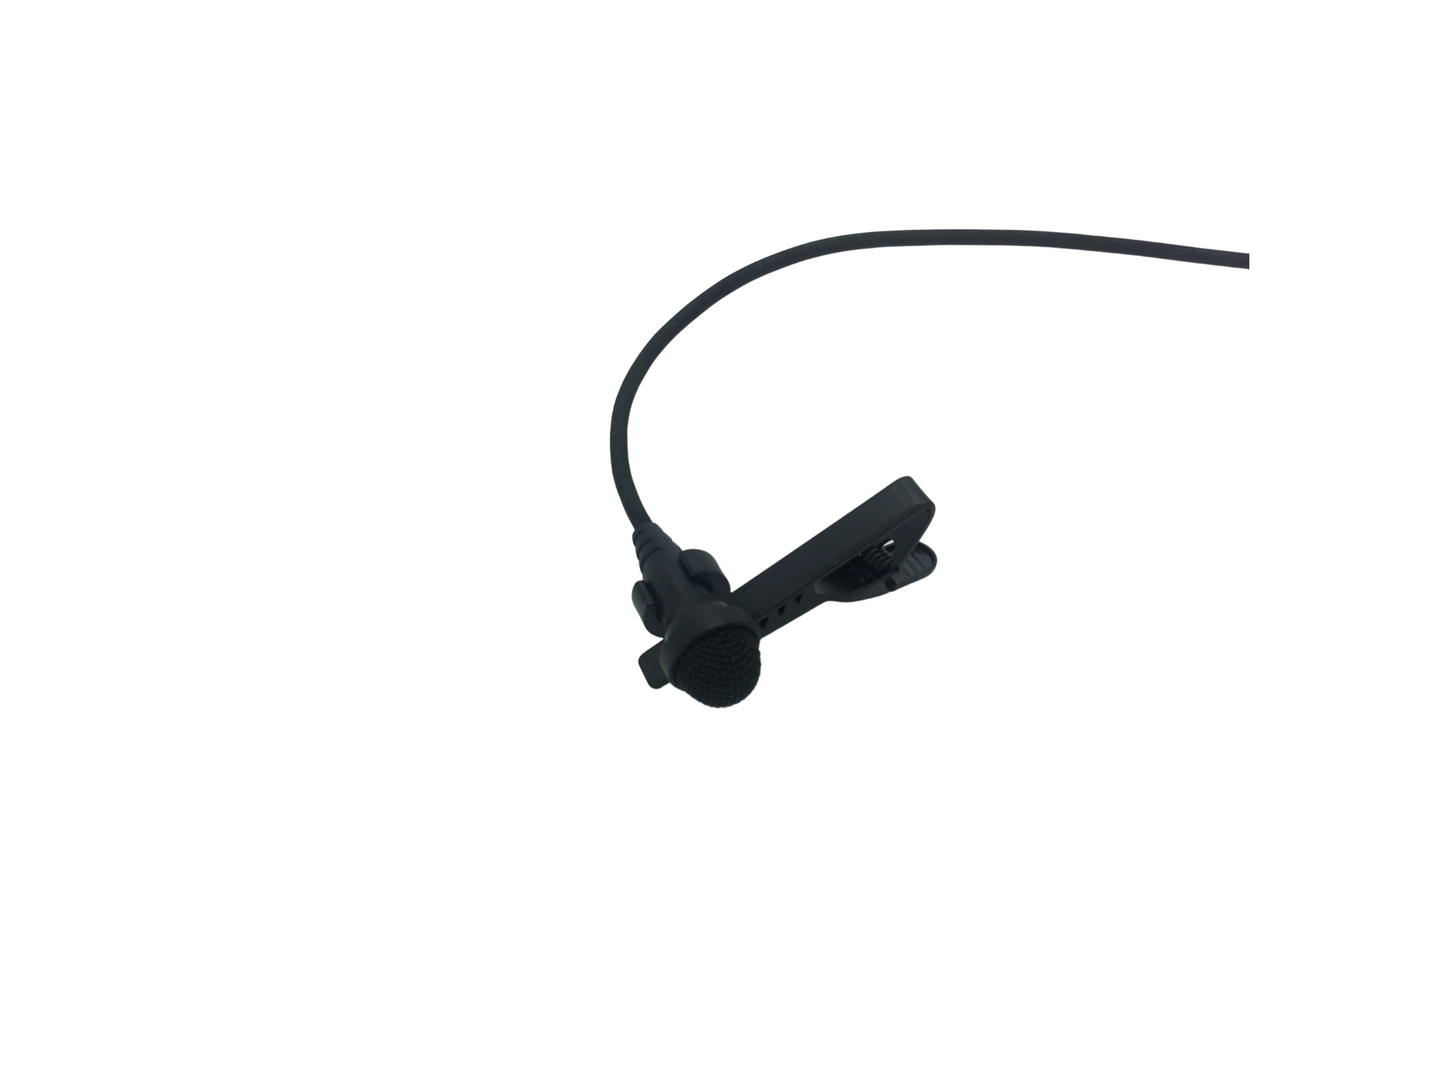 Slim Type Lapel Mic and Clip with 4 Pin Mini XLR Connector for Trantec S5.5 Belt-Packs